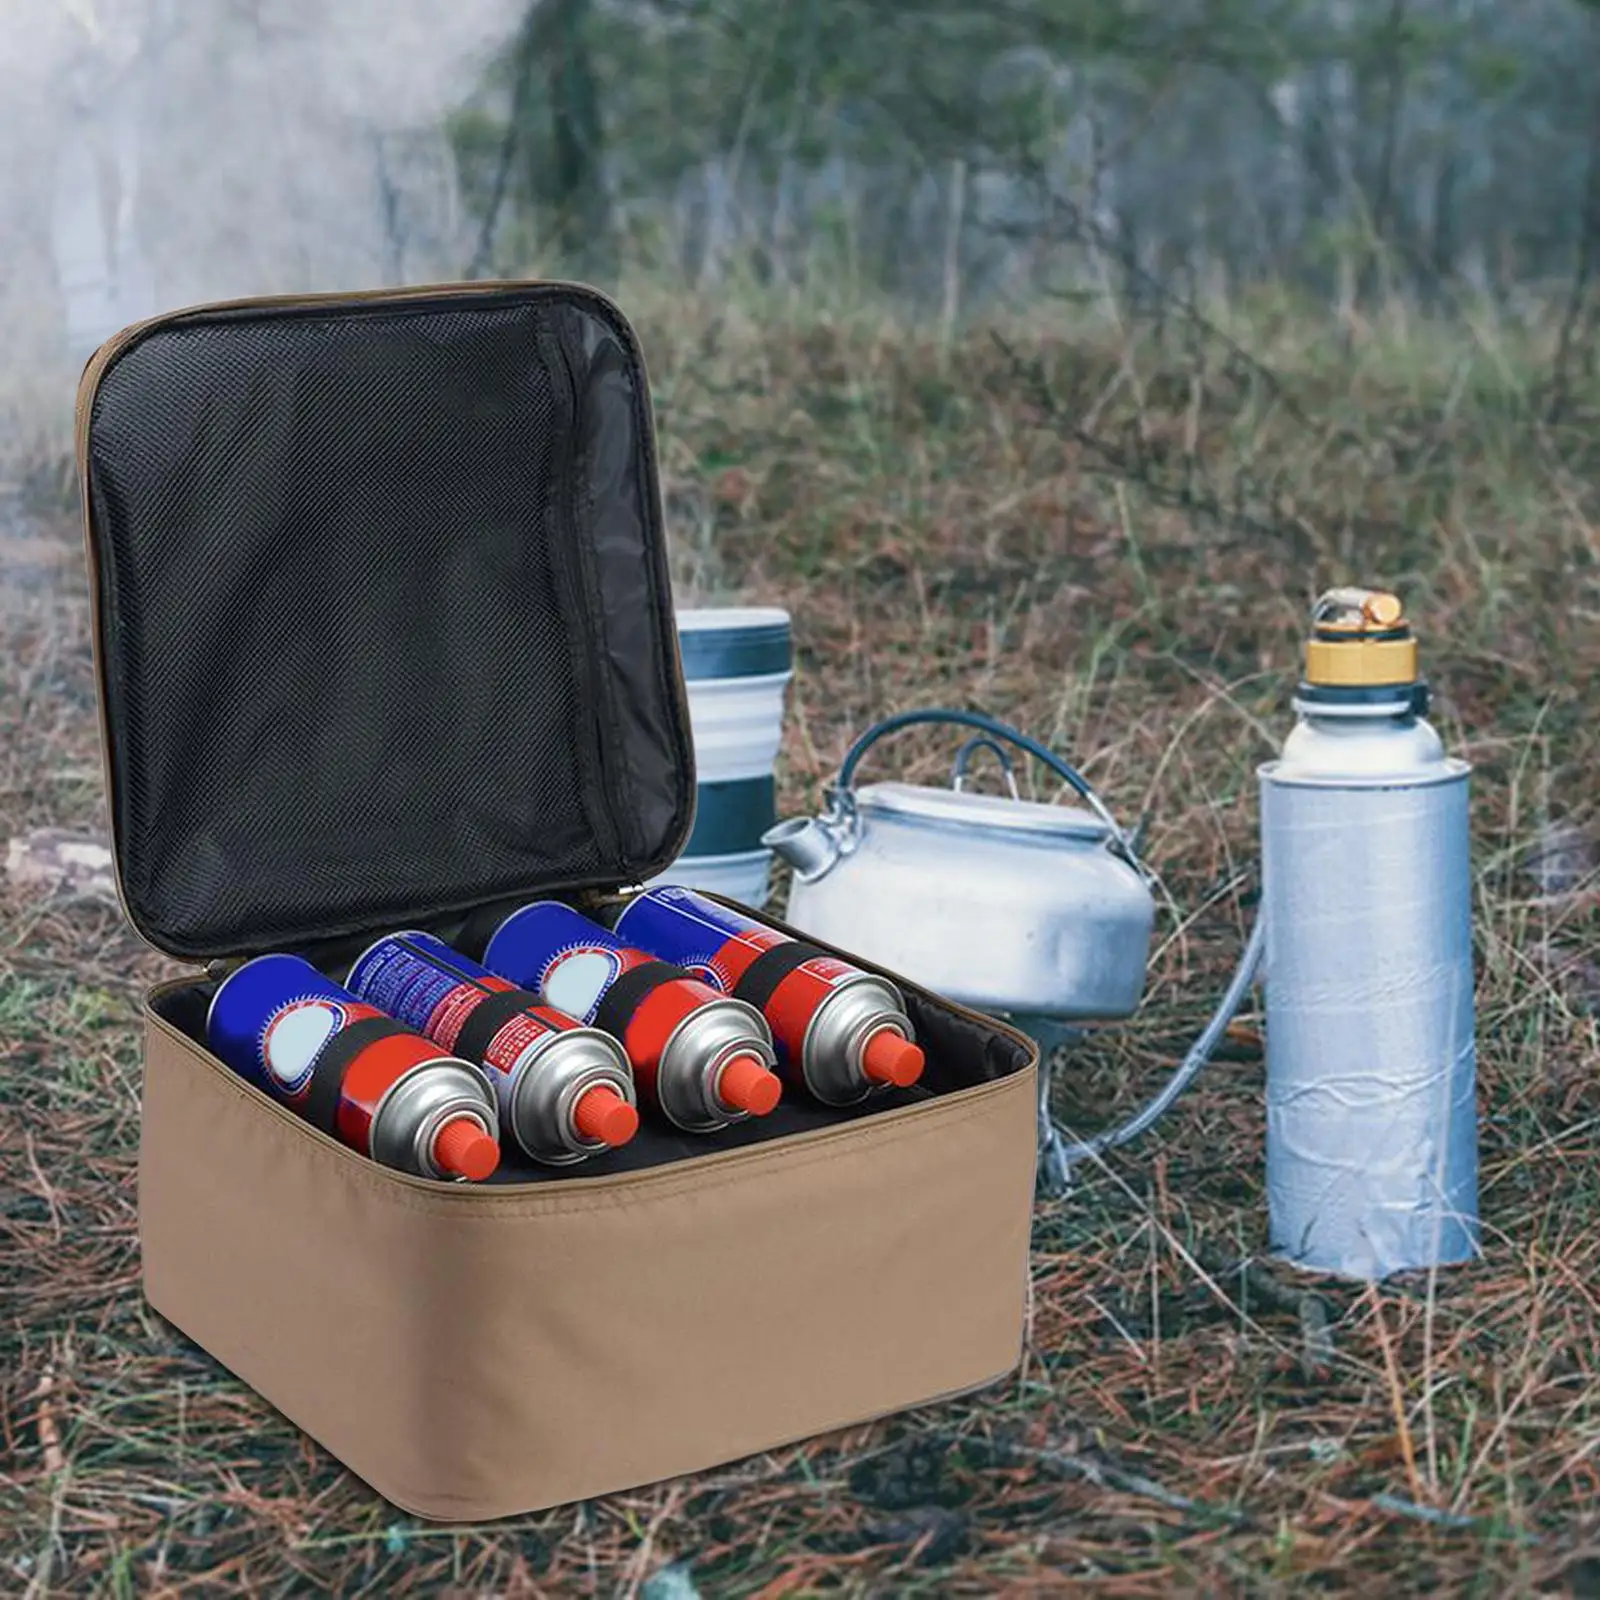 Gas Tank Storage Bag Multifunction Camping Gas Stove Carry Bag Gas Canister Bag for BBQ Traveling Road Trip Camping Tailgating